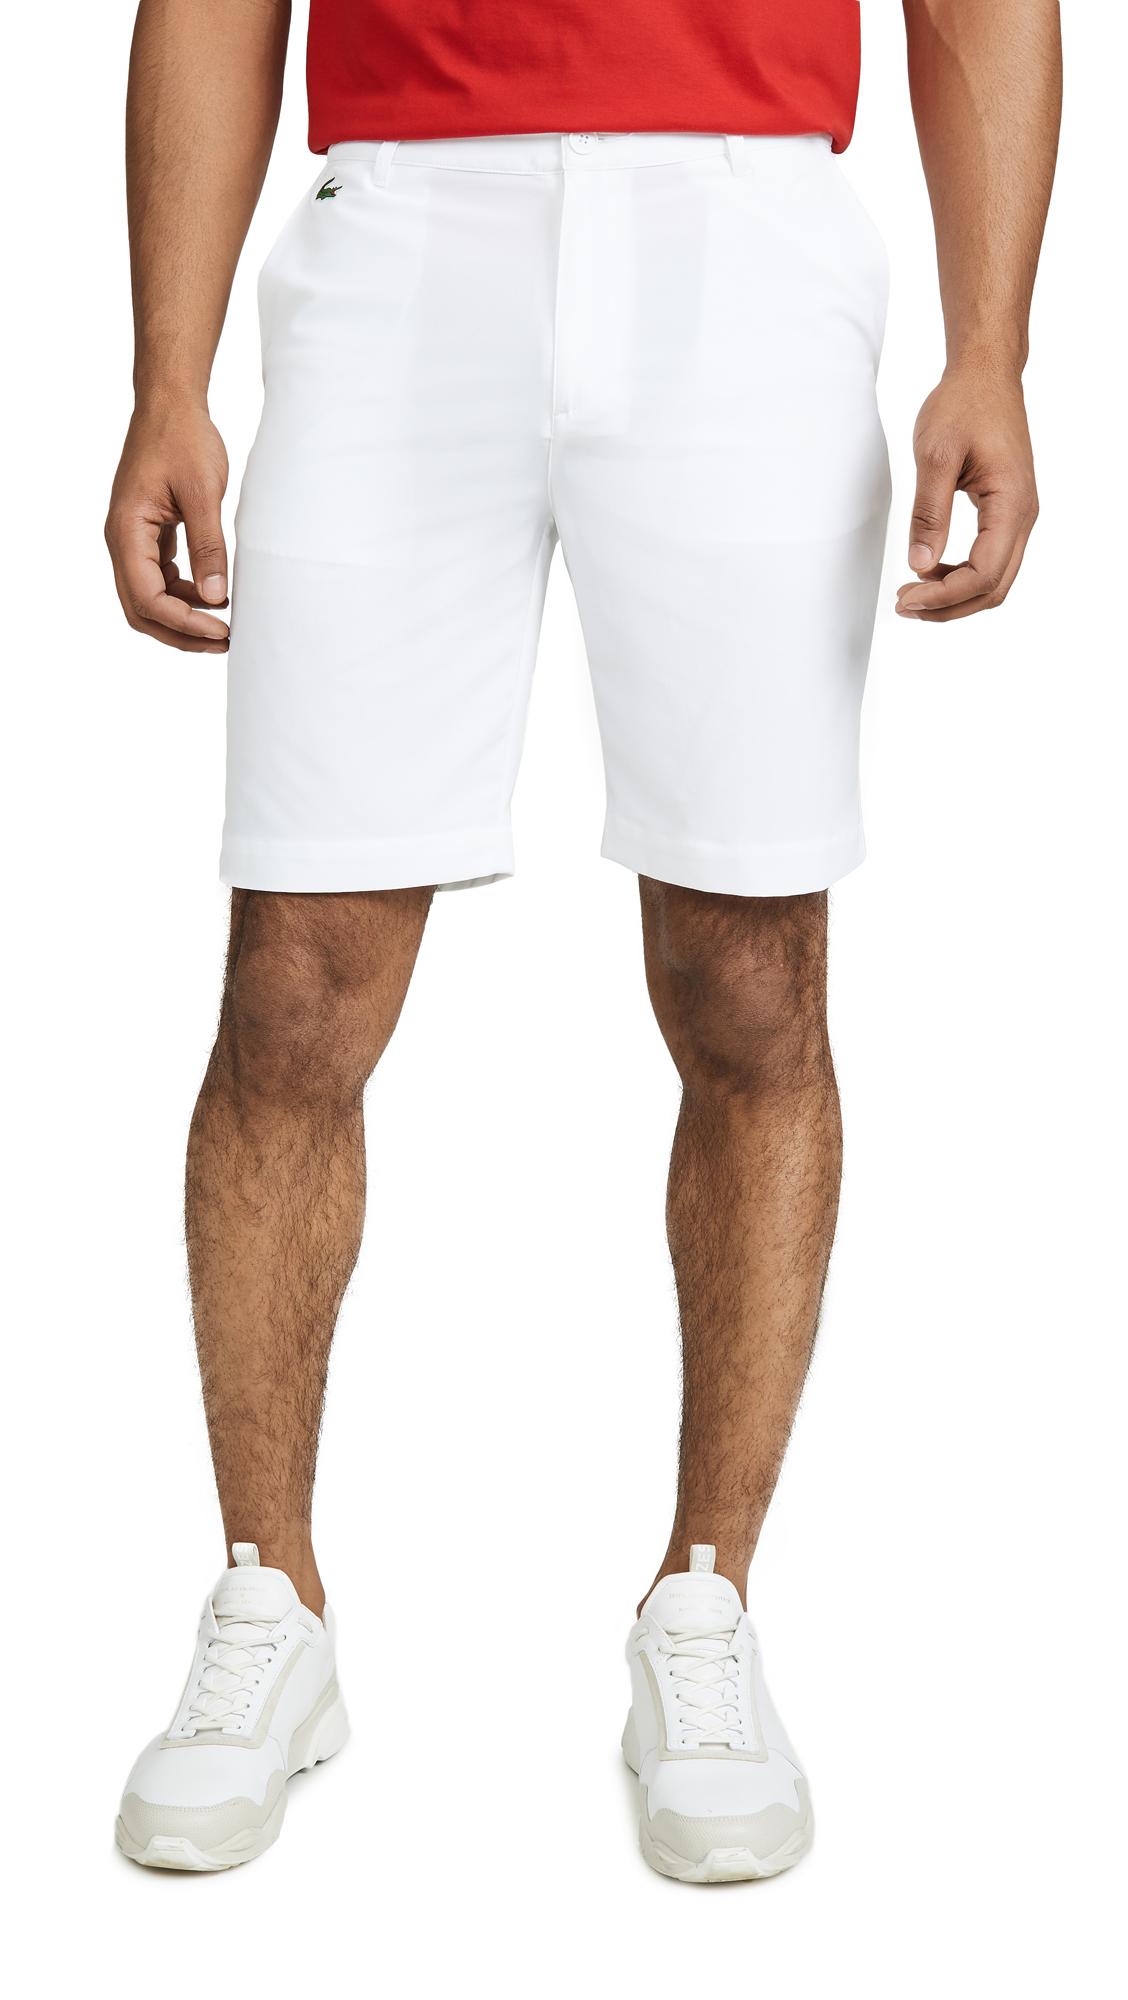 Lacoste Sport Golf Bermuda Shorts With Croc Logo in White for Men - Lyst